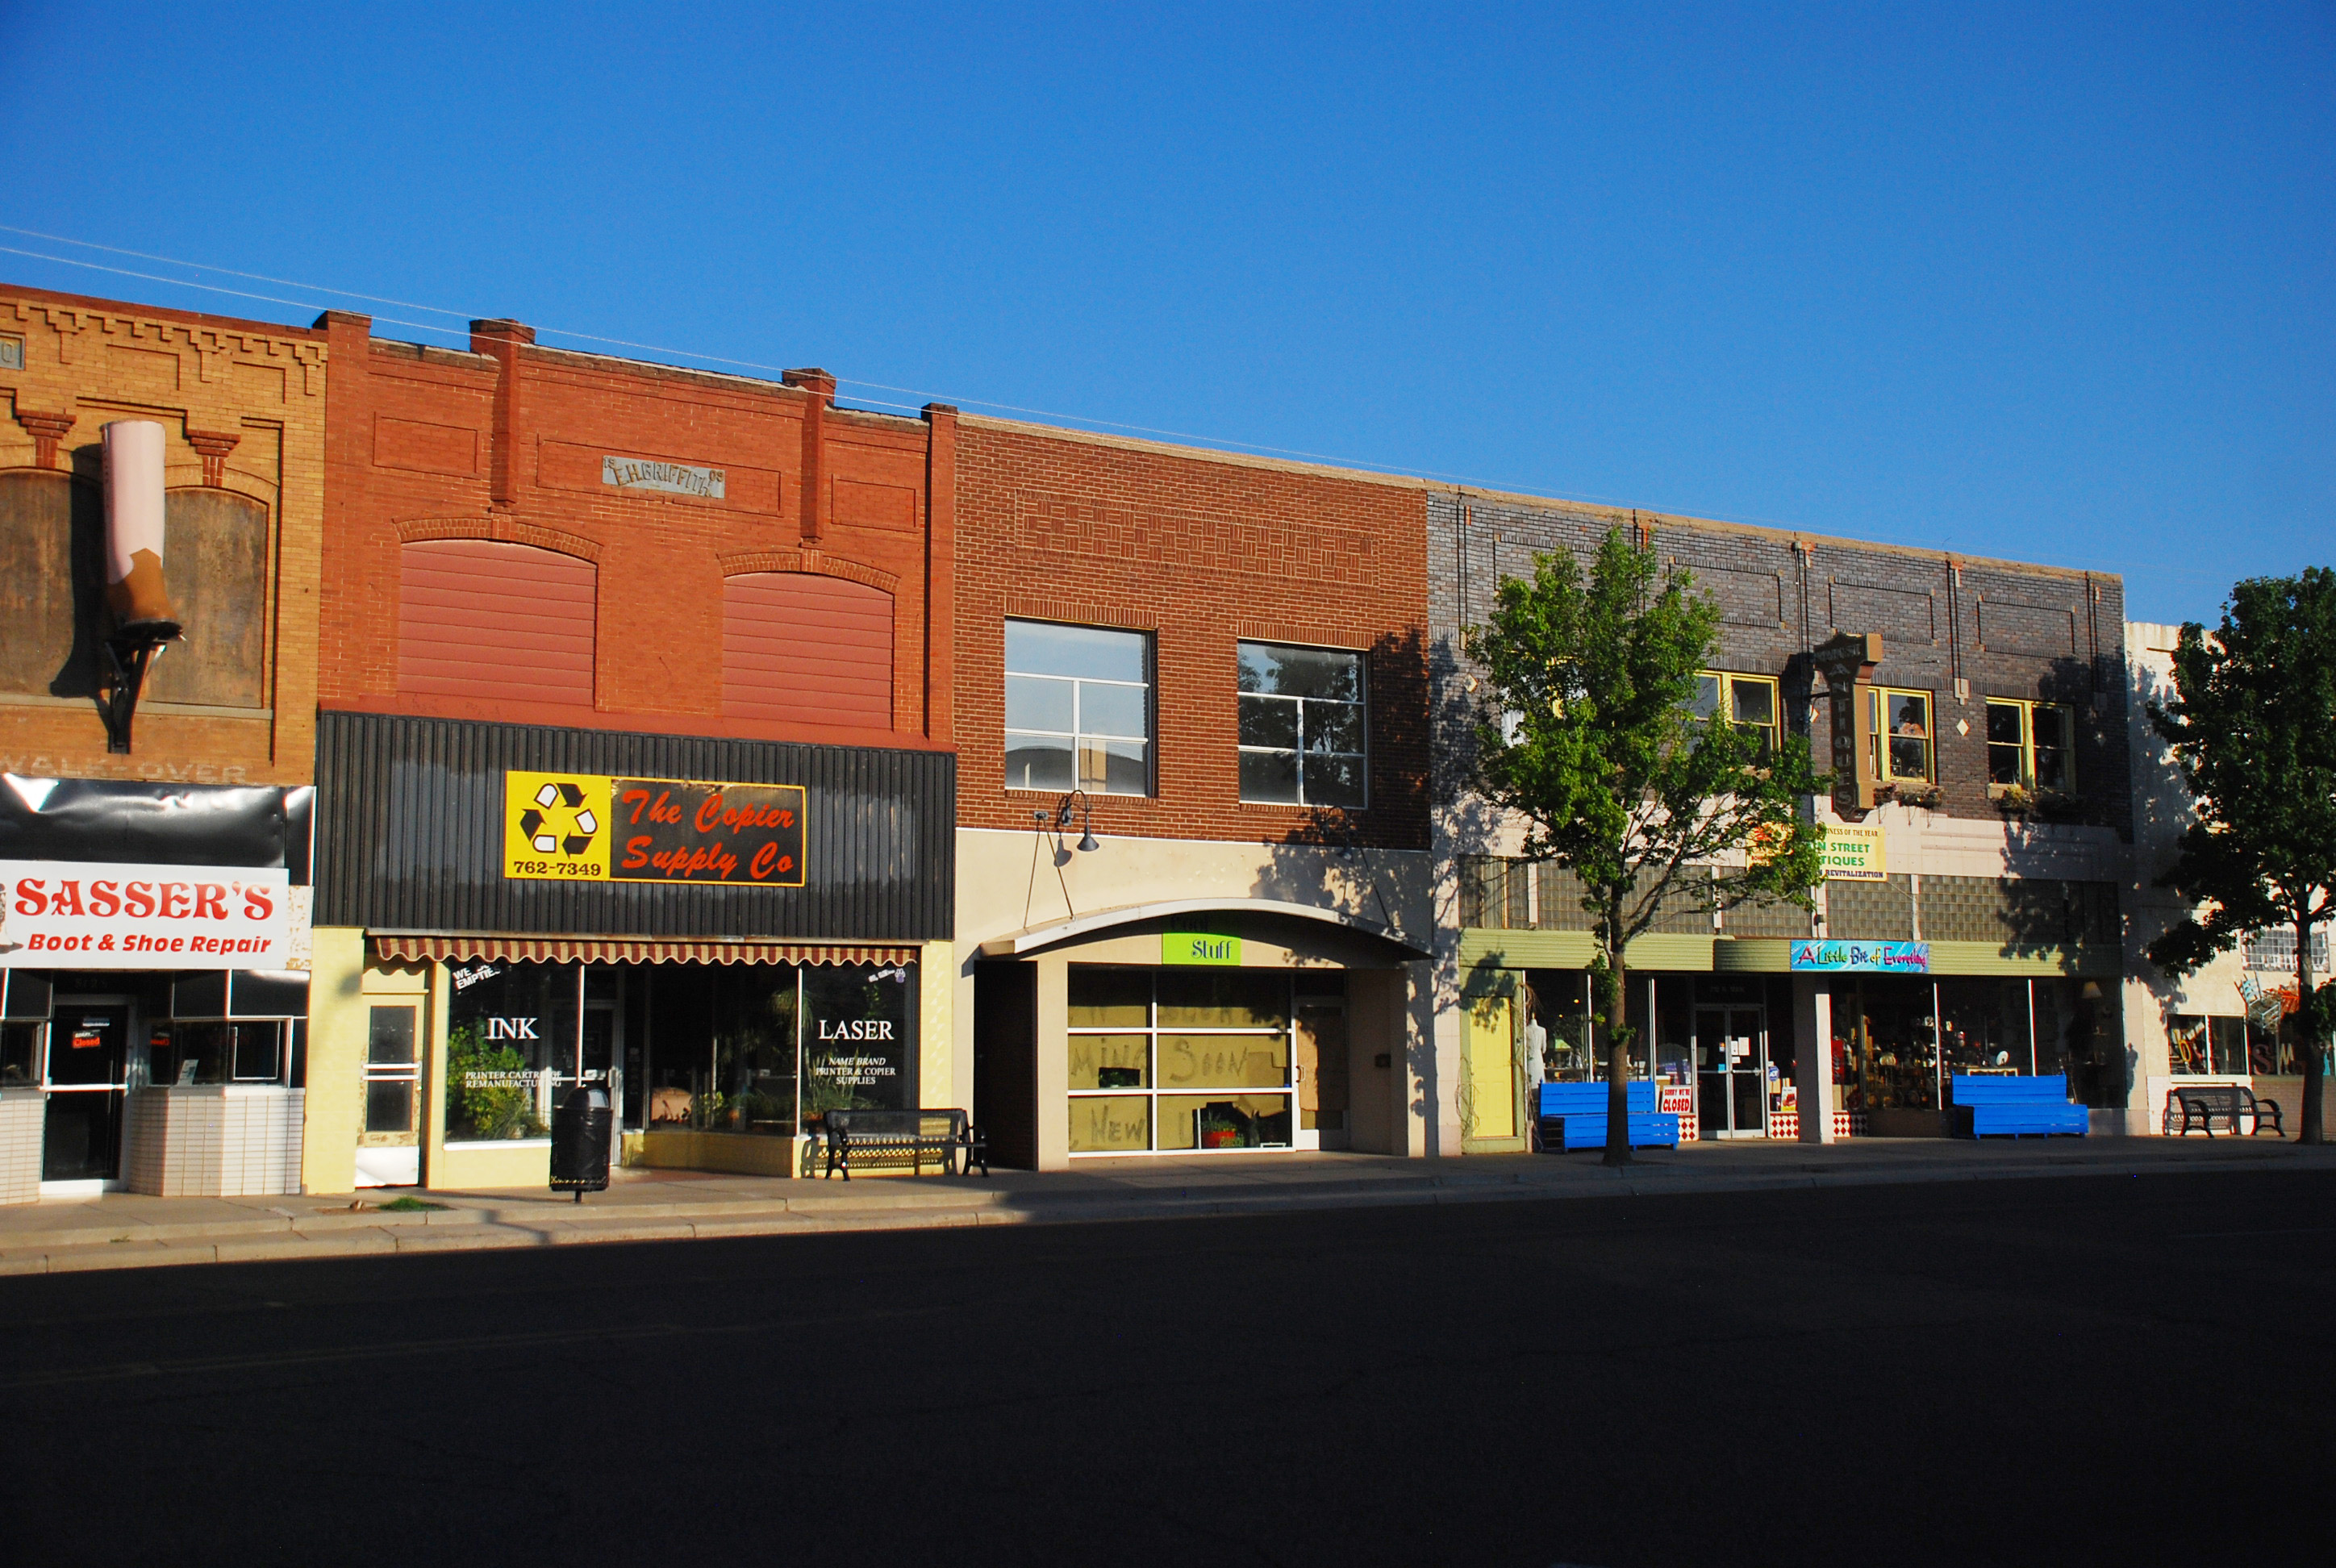 A photo of historic downtown Clovis, New Mexico